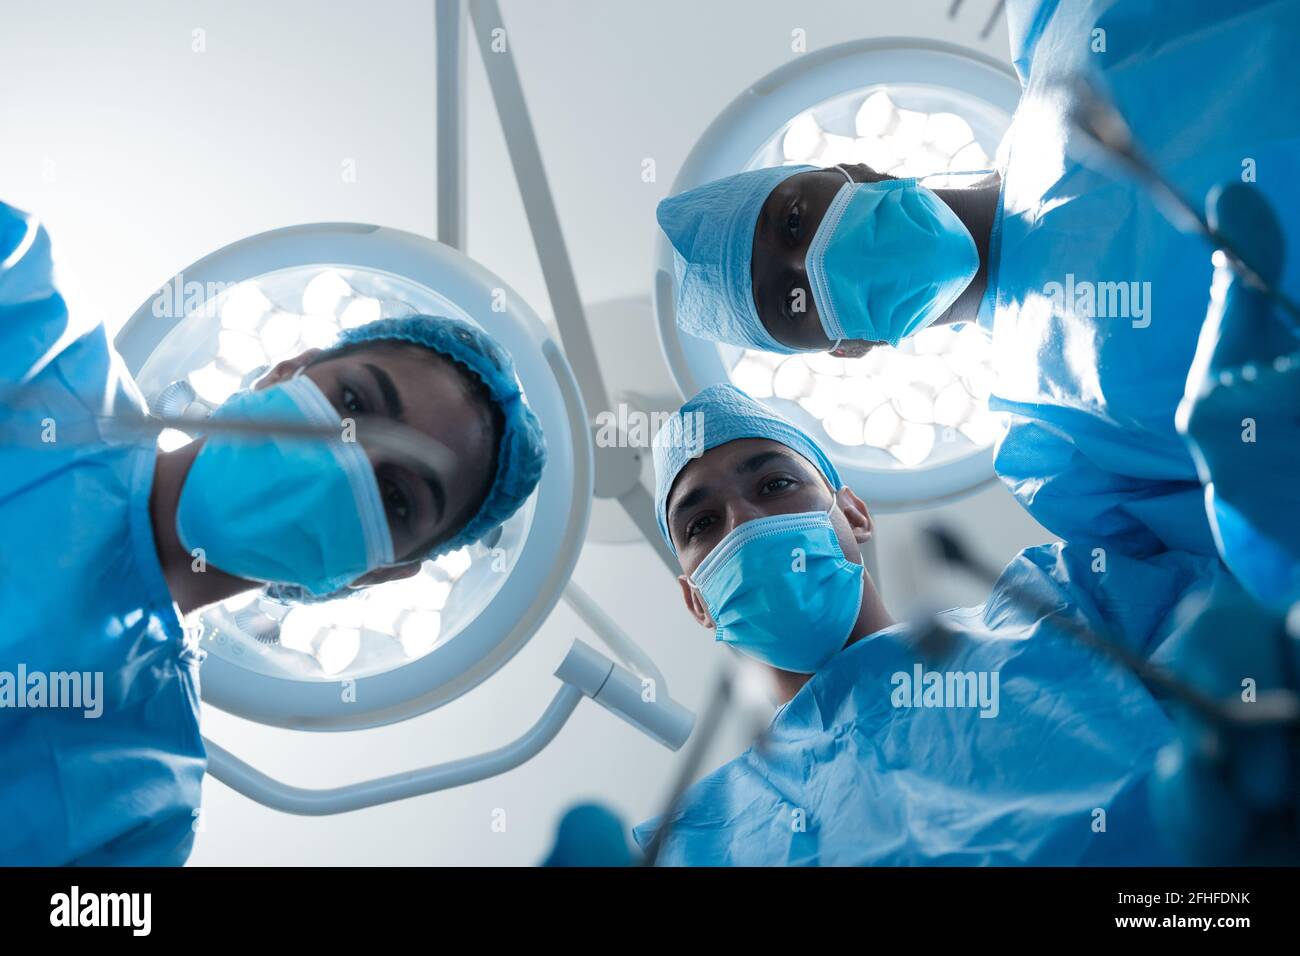 Diverse surgeons wearing face masks and protective clothing in operating theatre Stock Photo